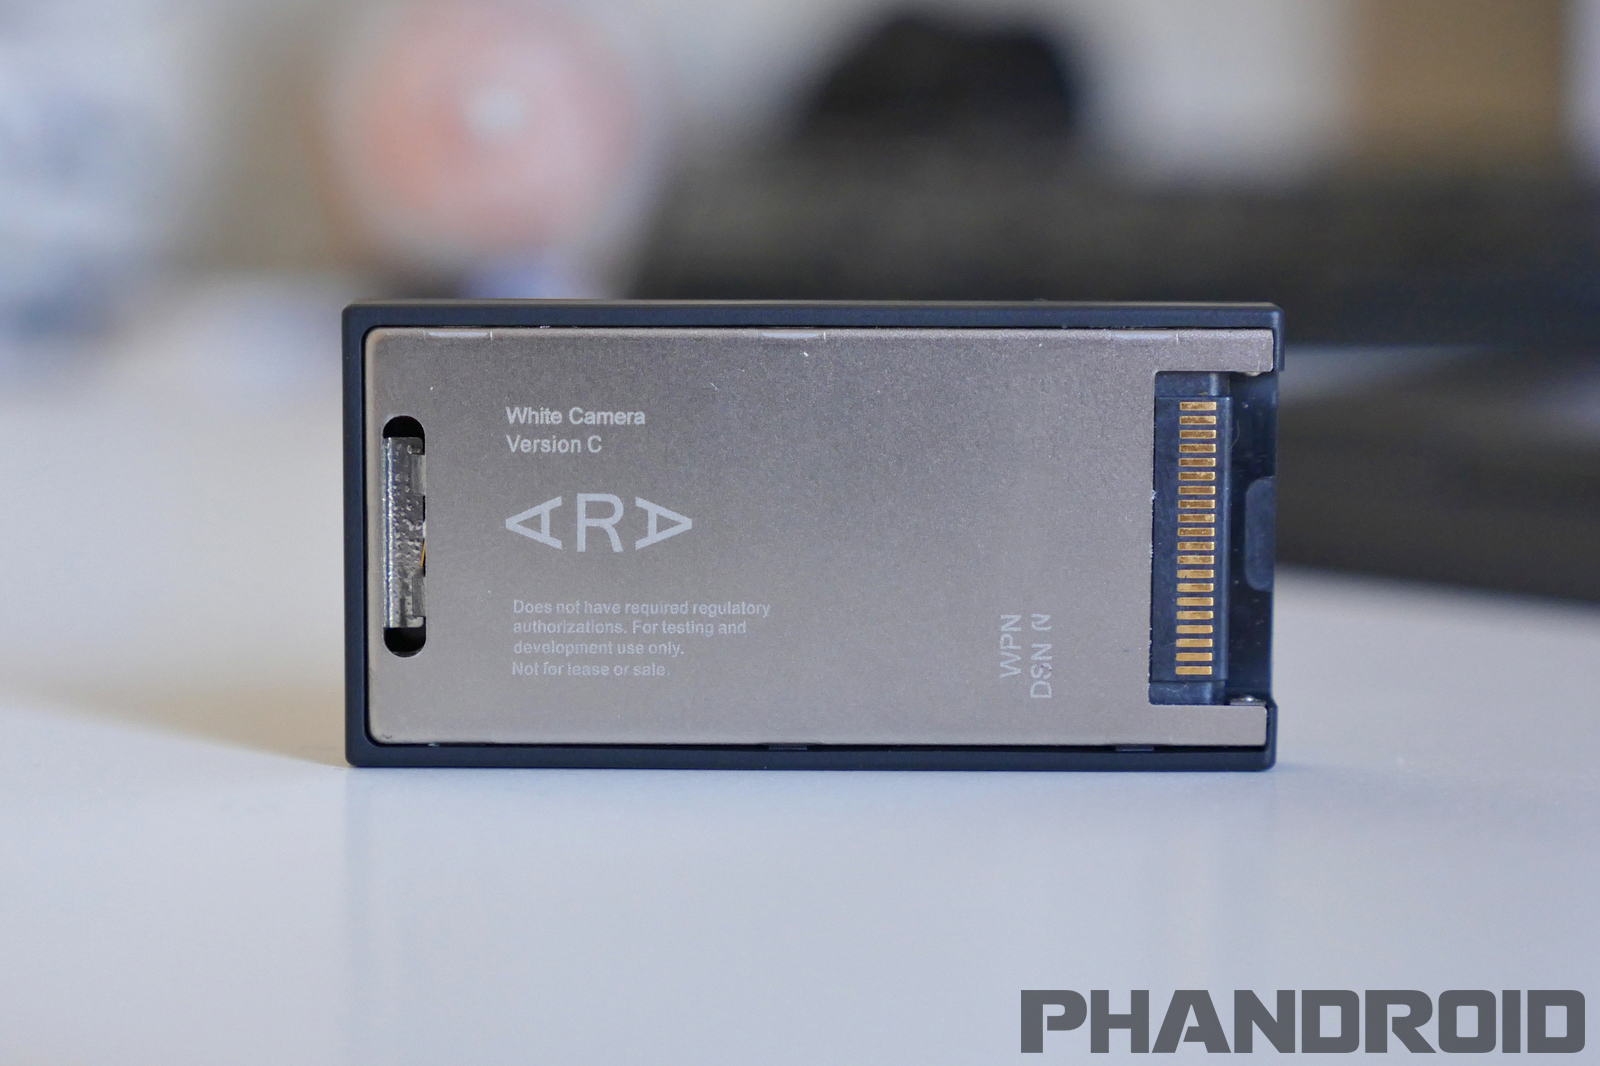 vurdere parkere Hævde Exclusive: Project ARA specifications, design and photos – Phandroid